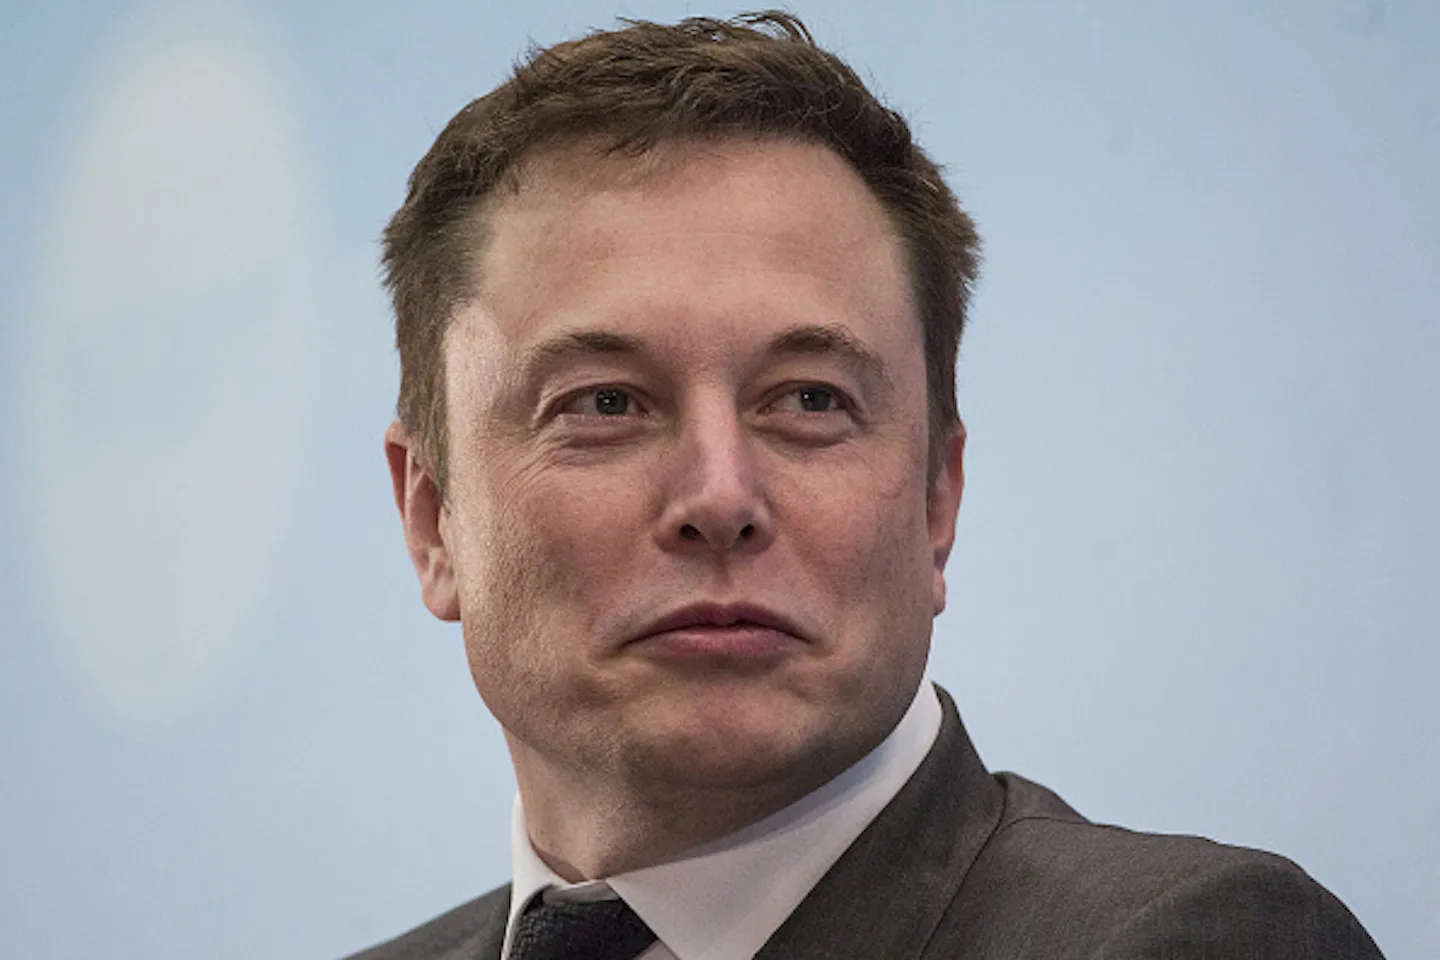 Elon Musk is recruiting the team to build his own Anti-"Woke" AI for his rival ChatGPT